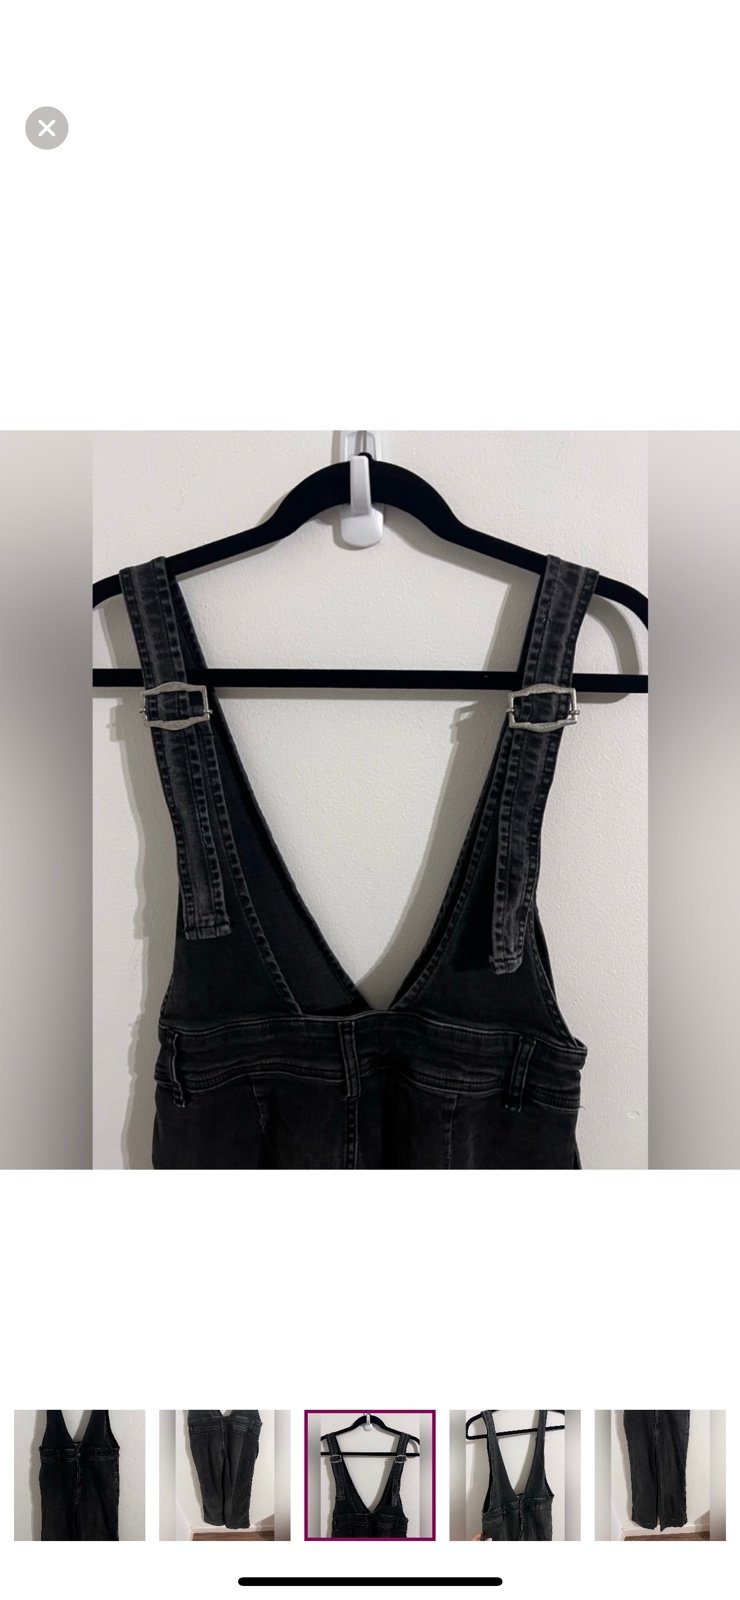 High quality Free people denim overalls size 6 PDdAjhSYD Cheap